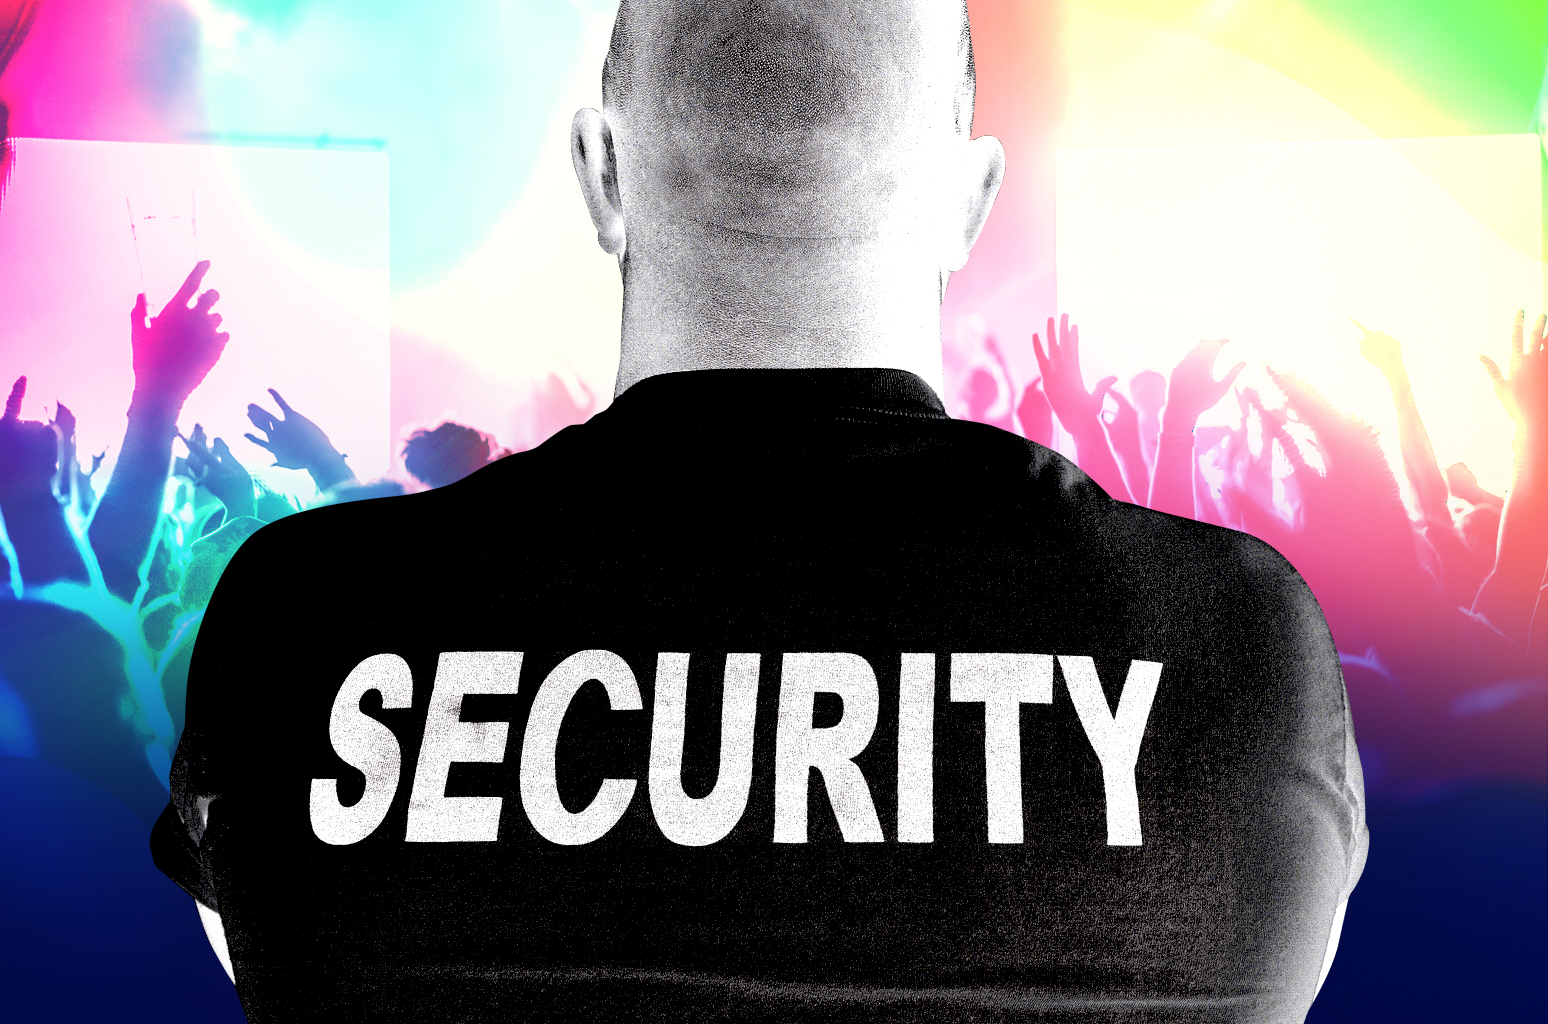 dumb things while high - security bouncers - Security